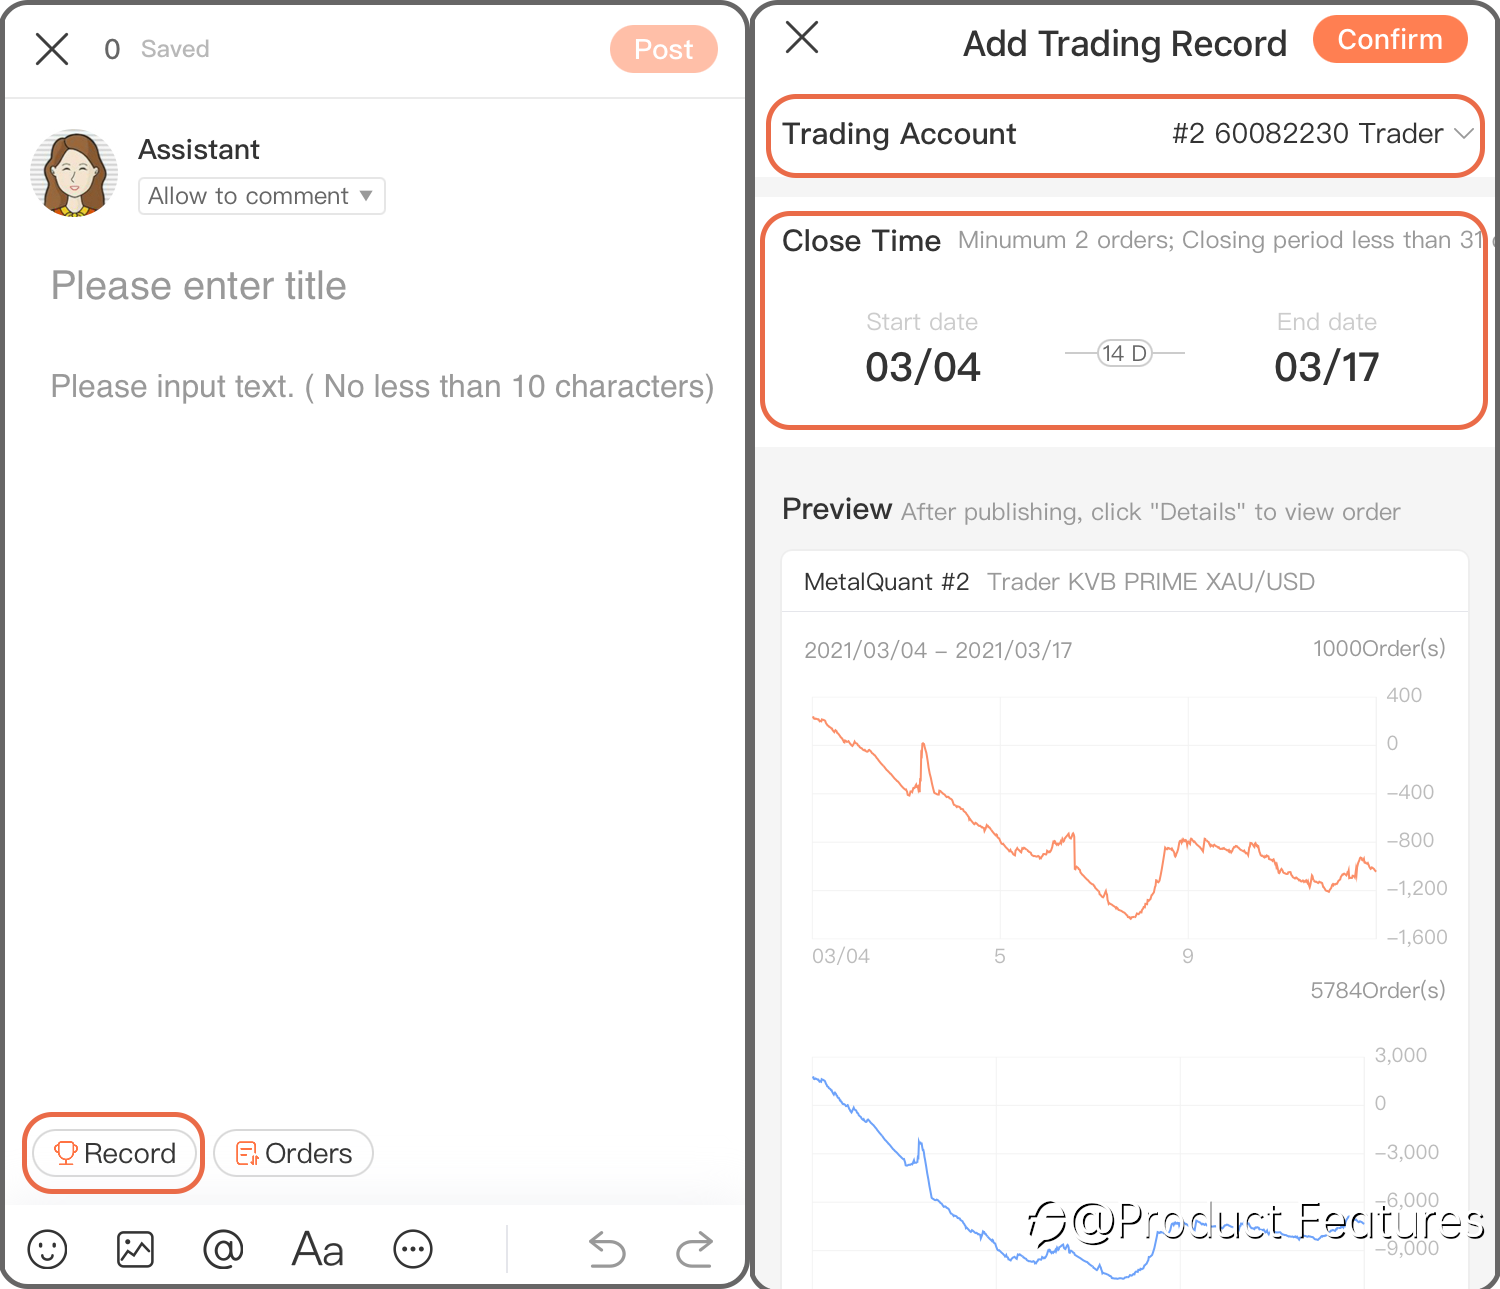 How to Add Trading Order or Trading Record